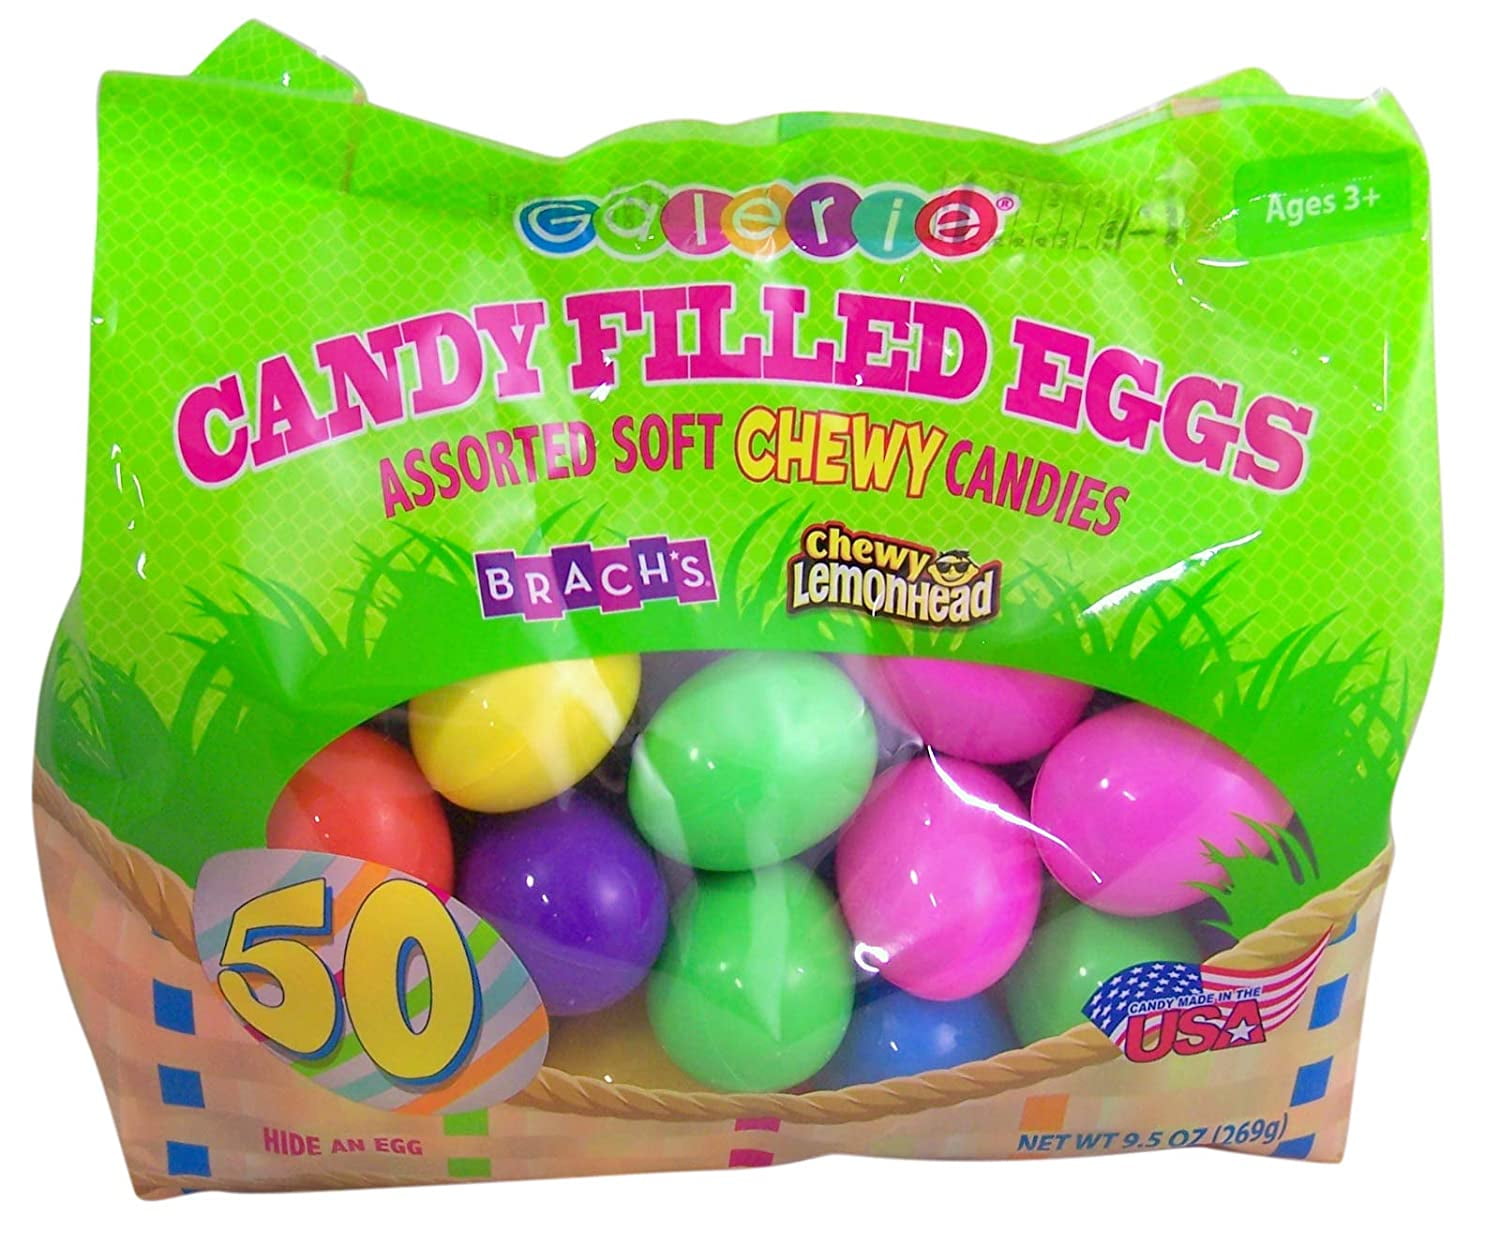 Walmart Easter Eggs Jelly Beans Gift Card No $ Value Collectible FD-40035 